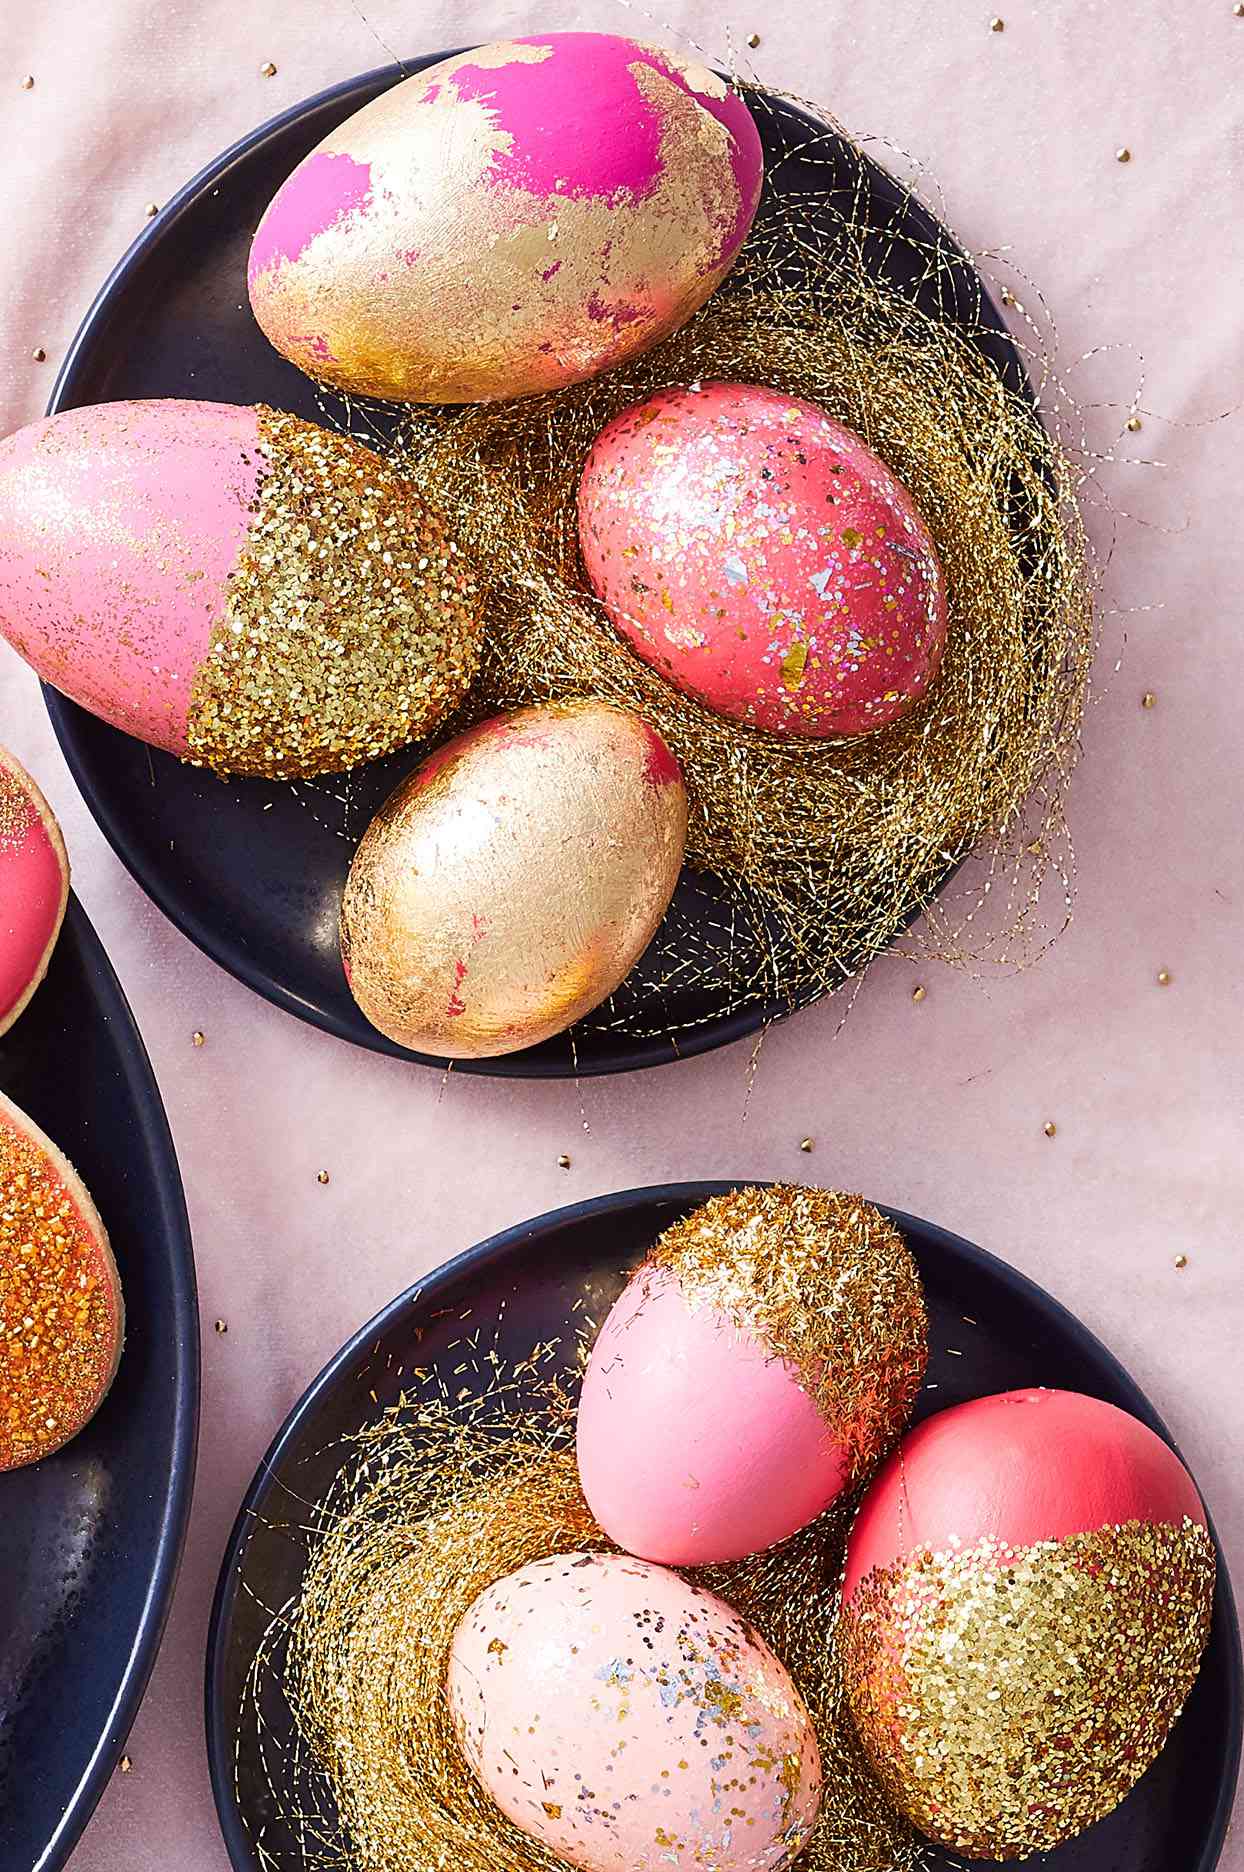 35 Pretty Ways to Decorate Easter Eggs Without Dye